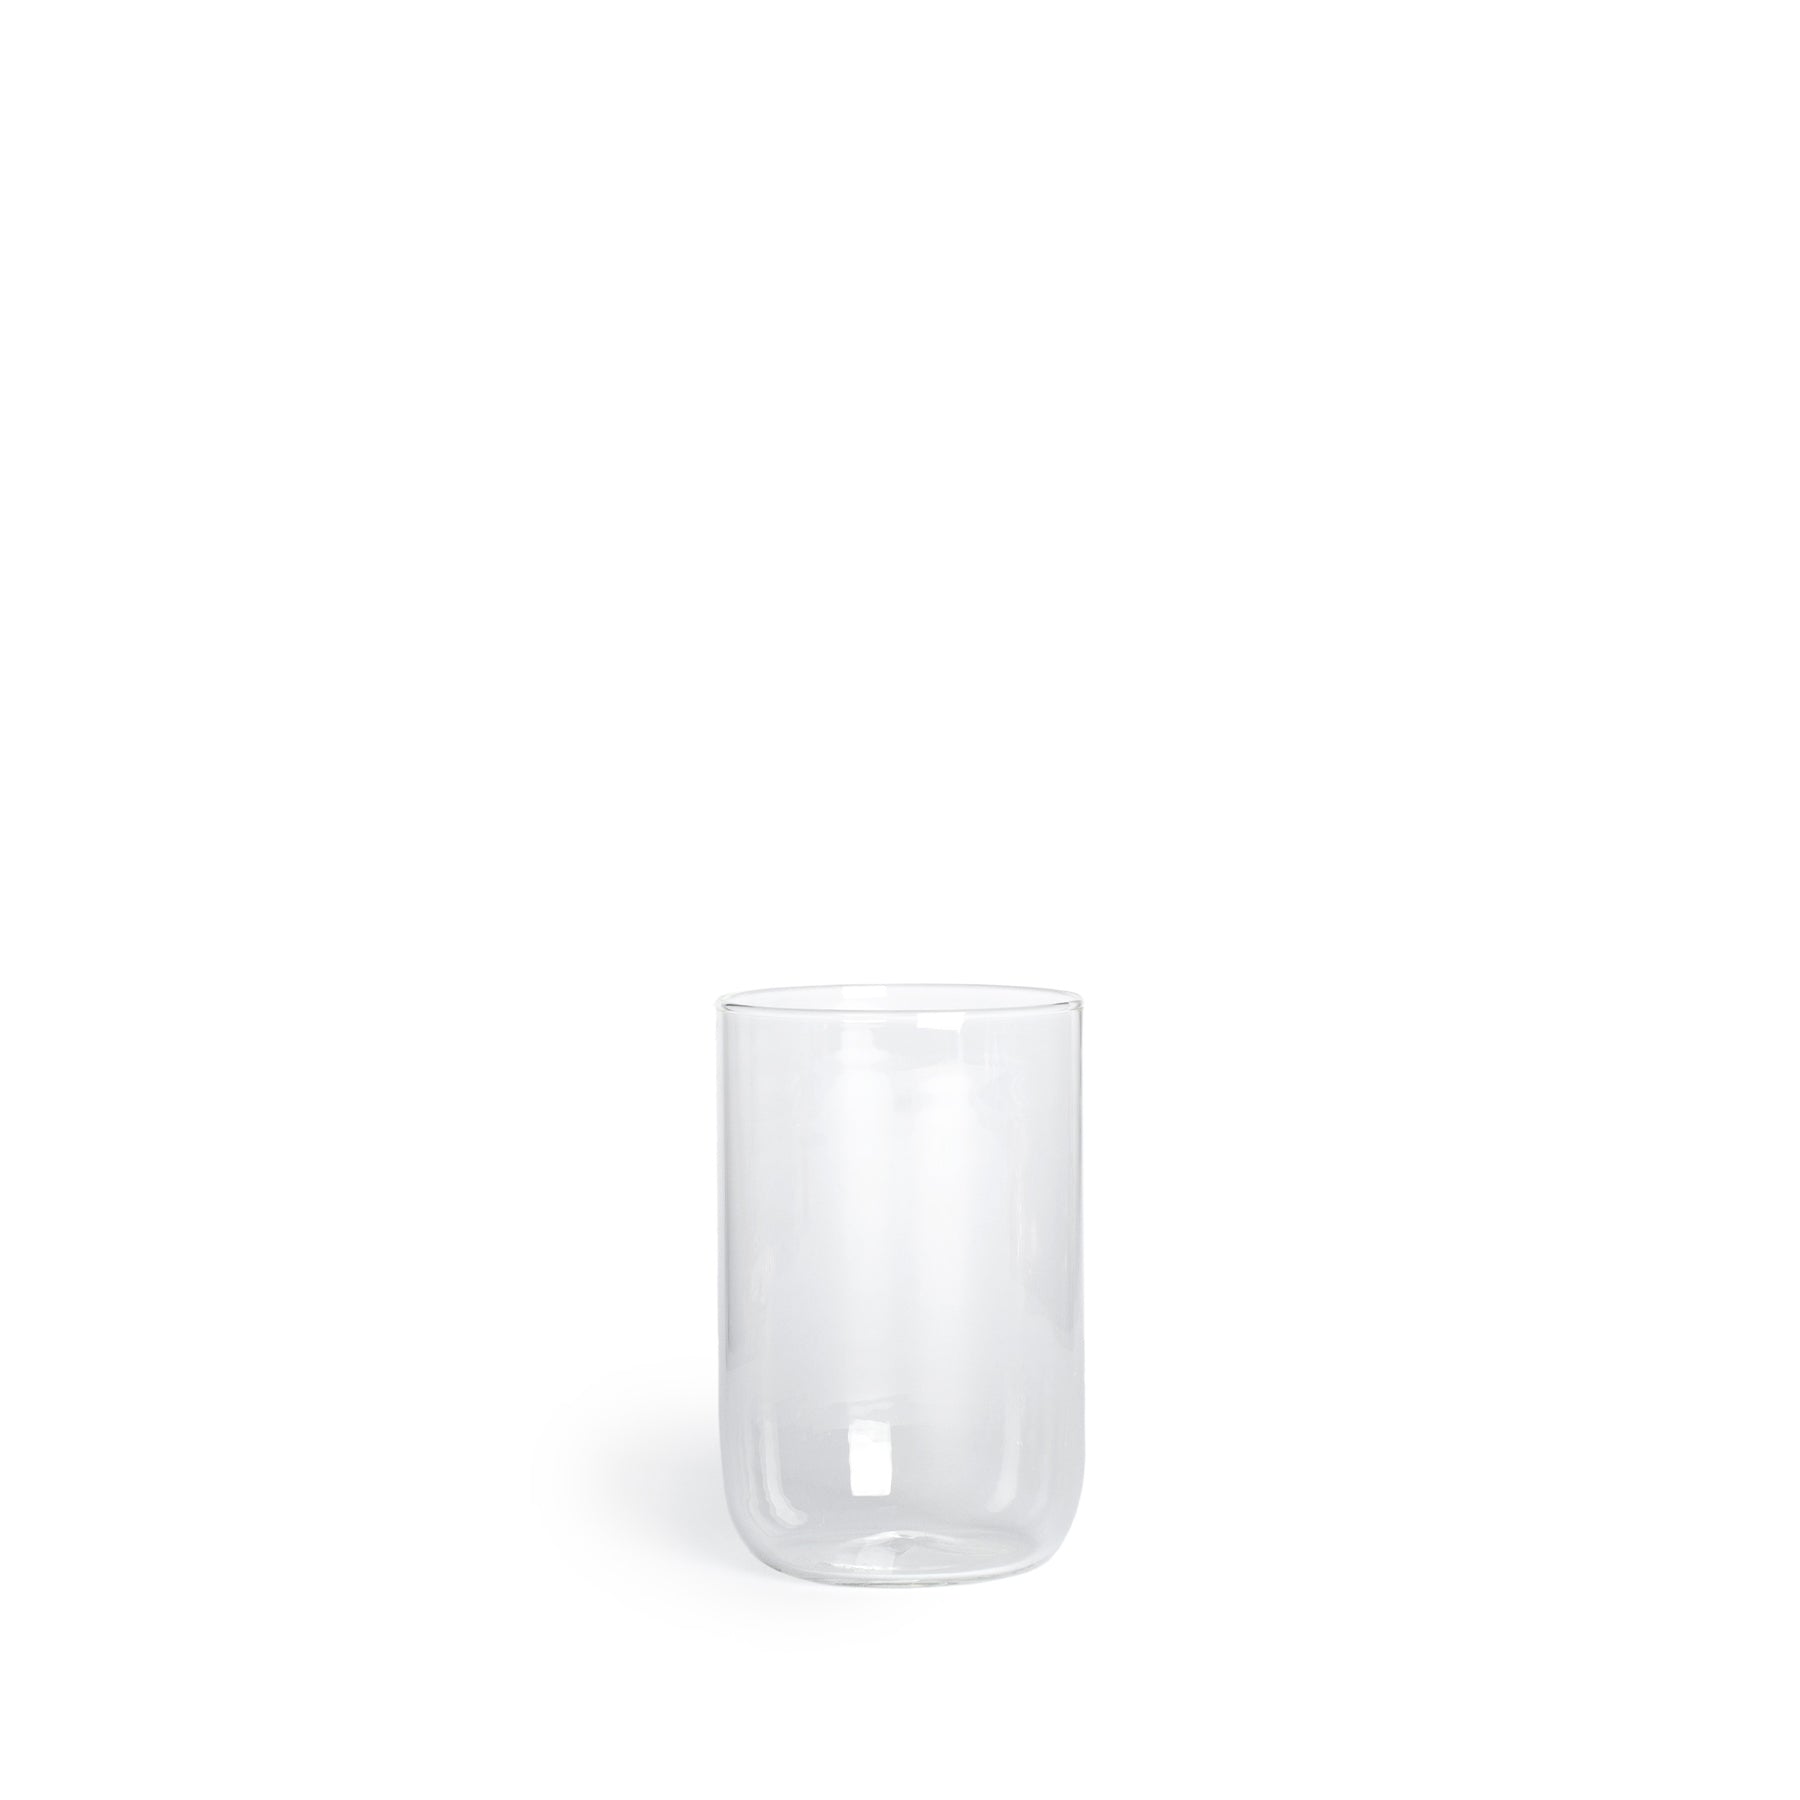 Tuccio Bevanda Glass in Clear (Set of 2) Zoom Image 1